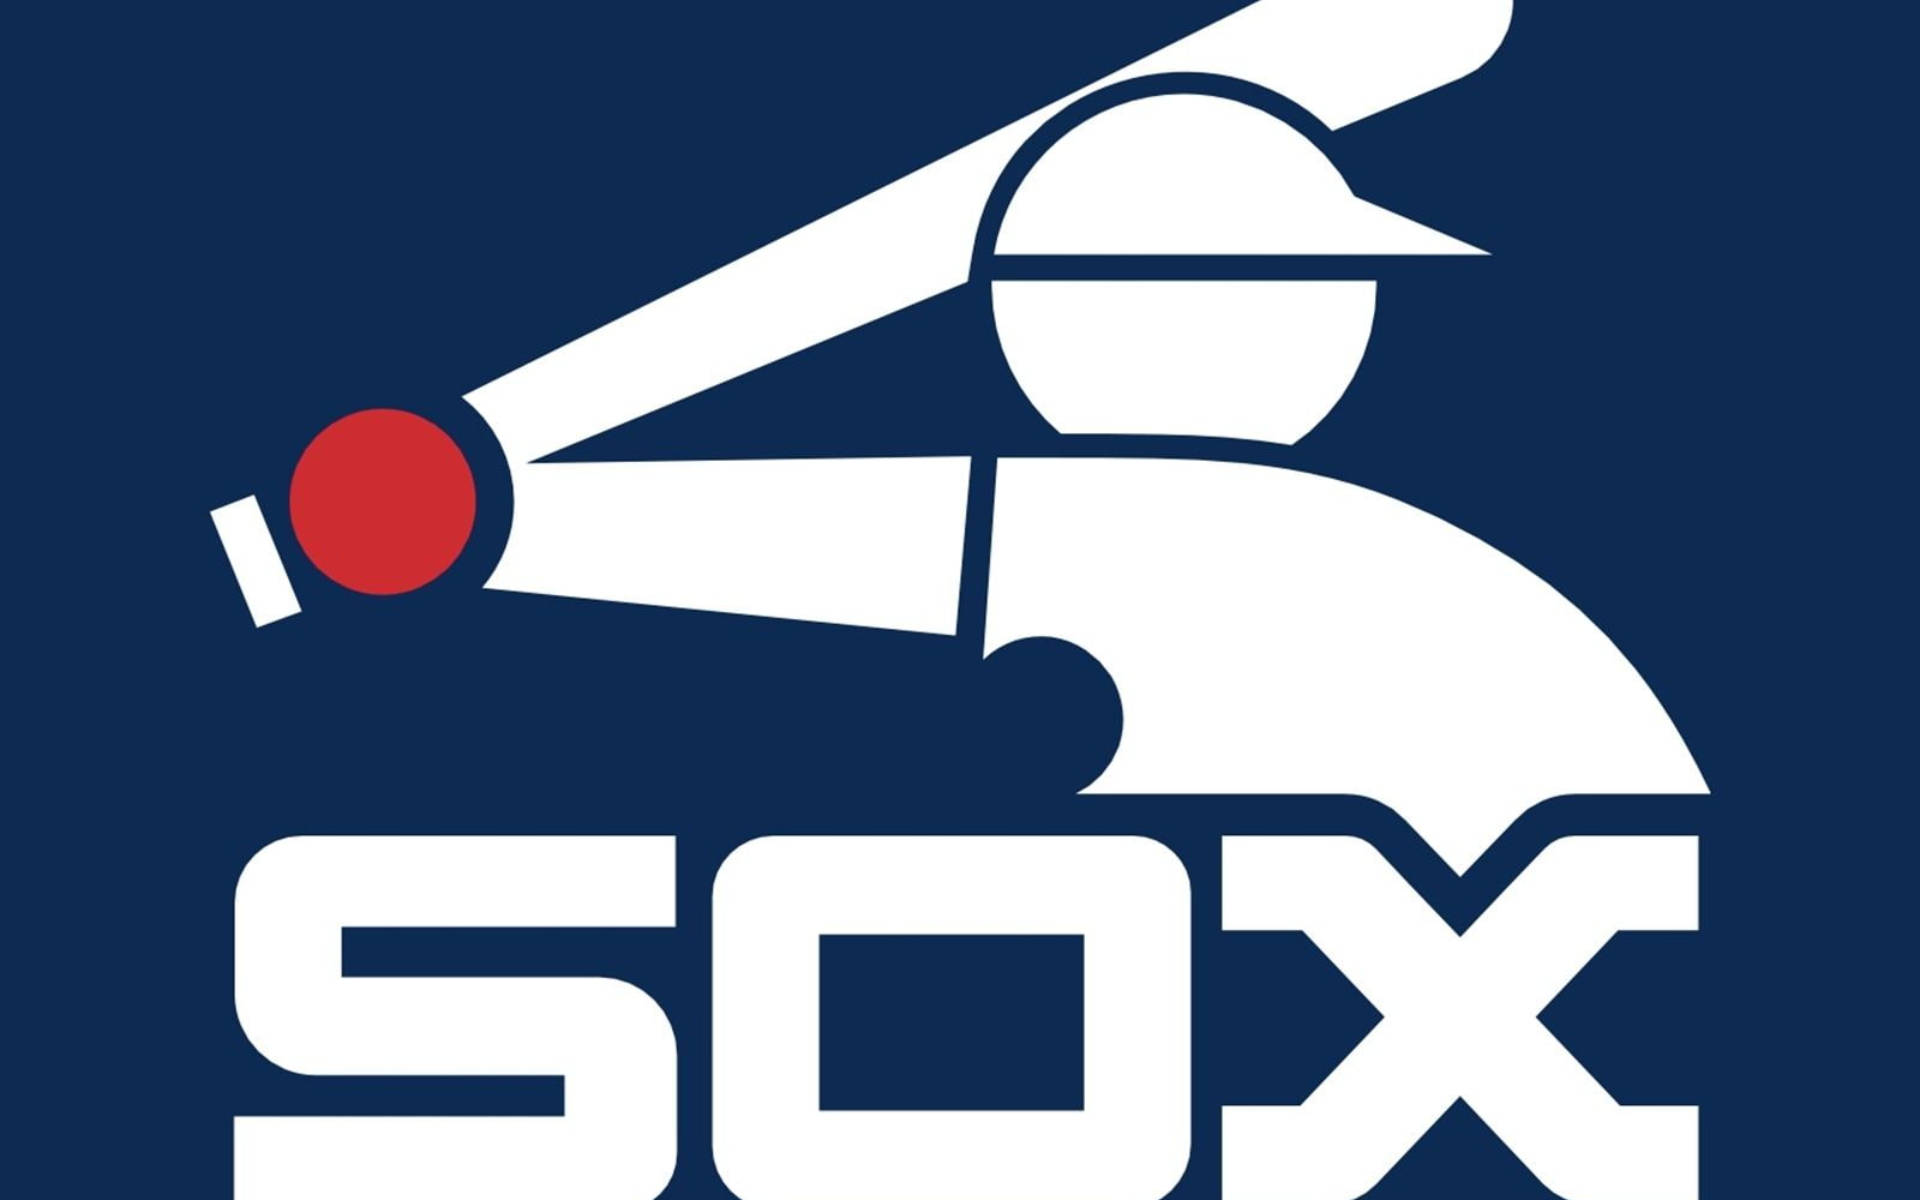 Chicago White Sox In Blue Background